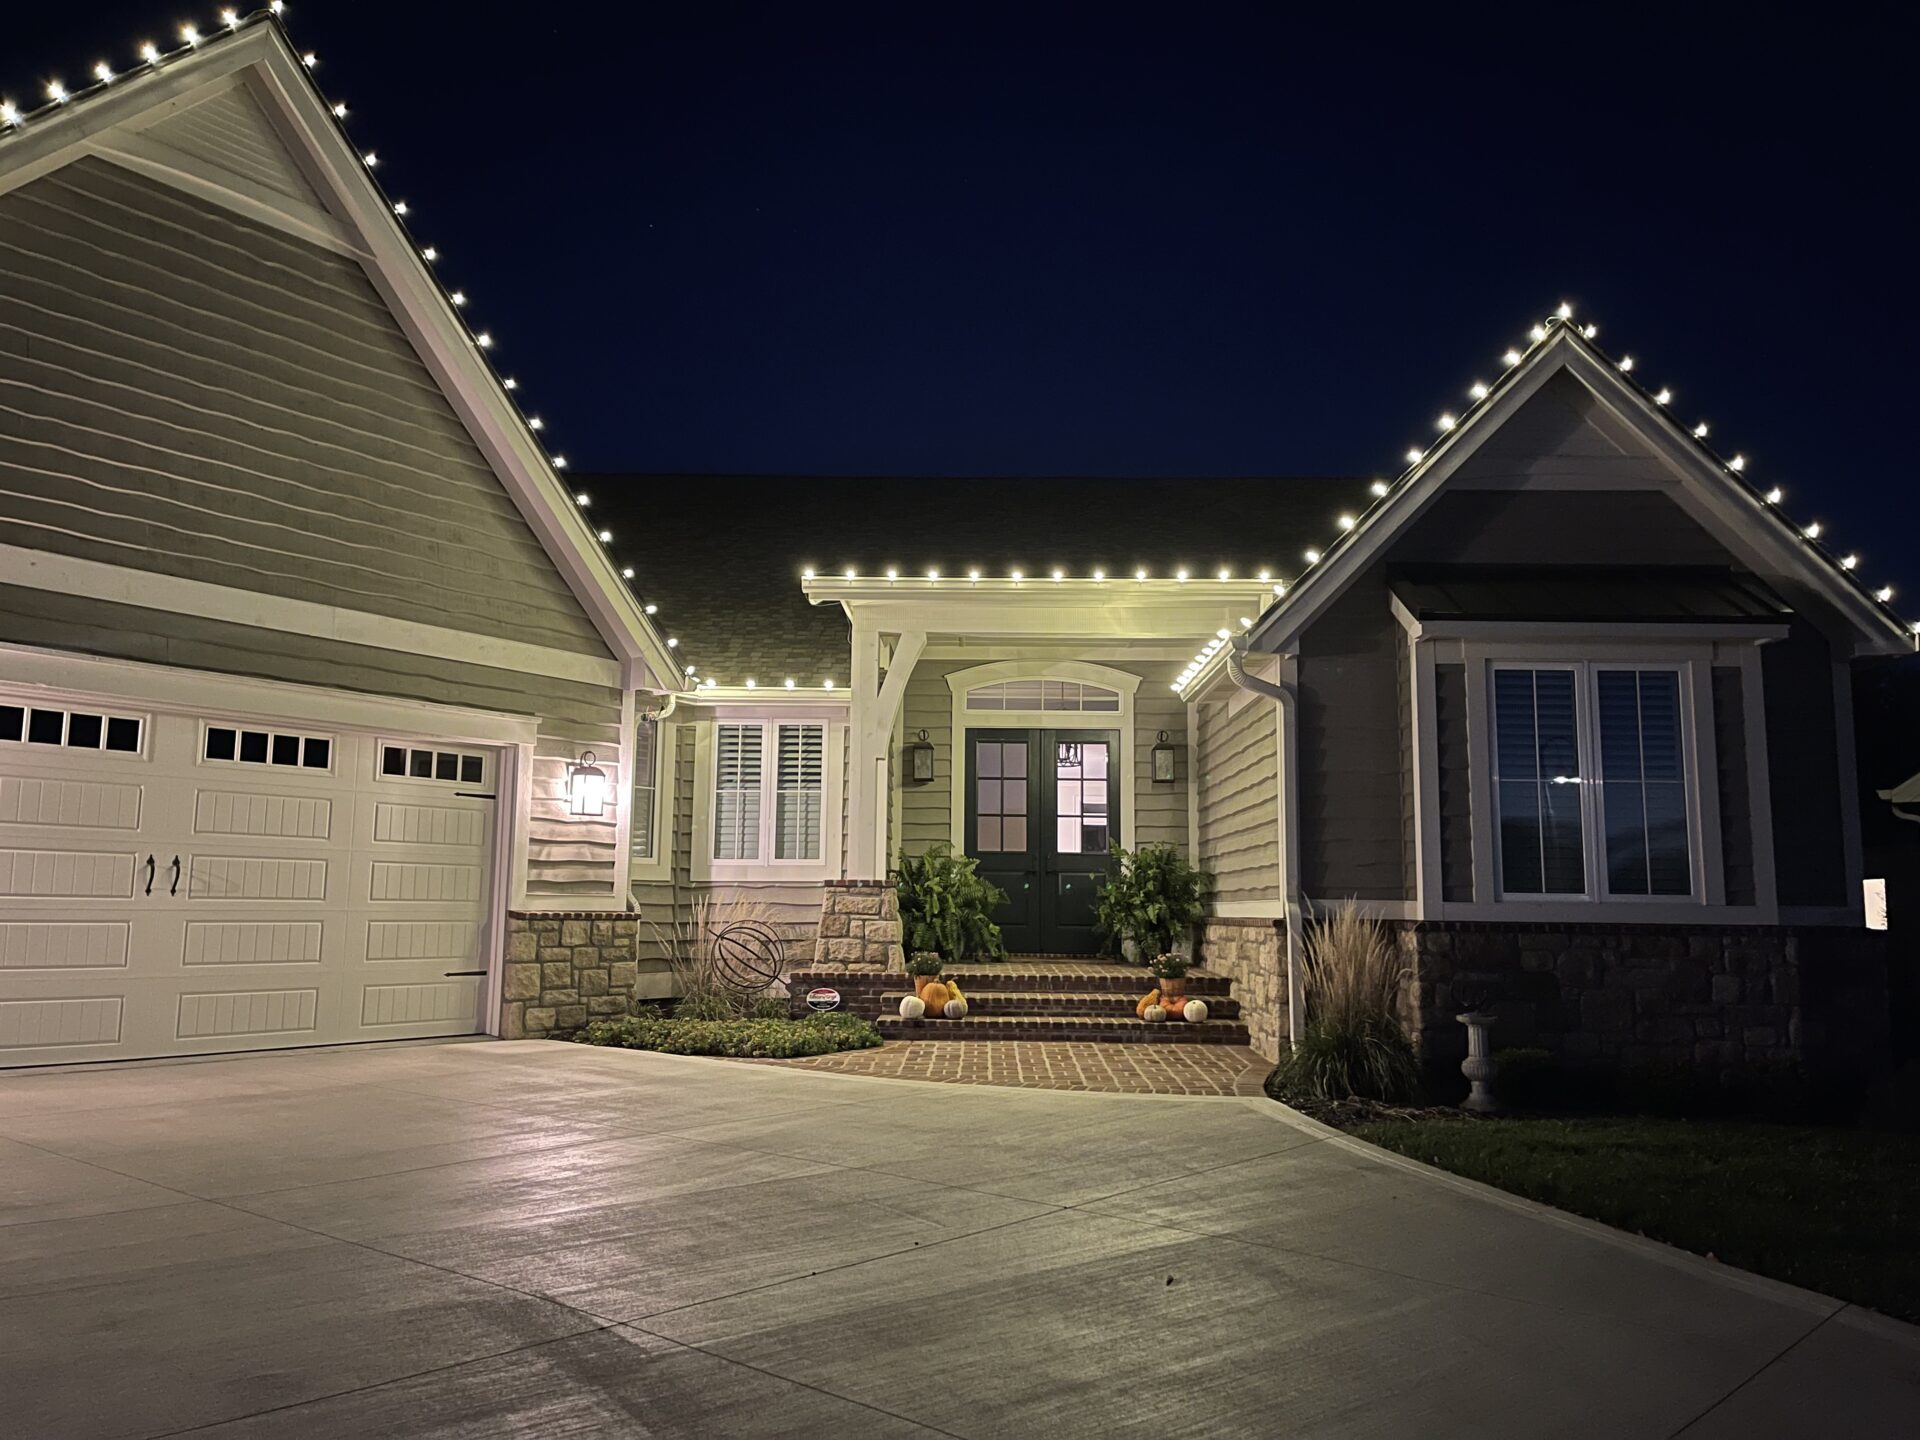 Residential Holiday Lighting Service - Squeegee Squad - Topeka, Lawrence & Manhattan Kansas